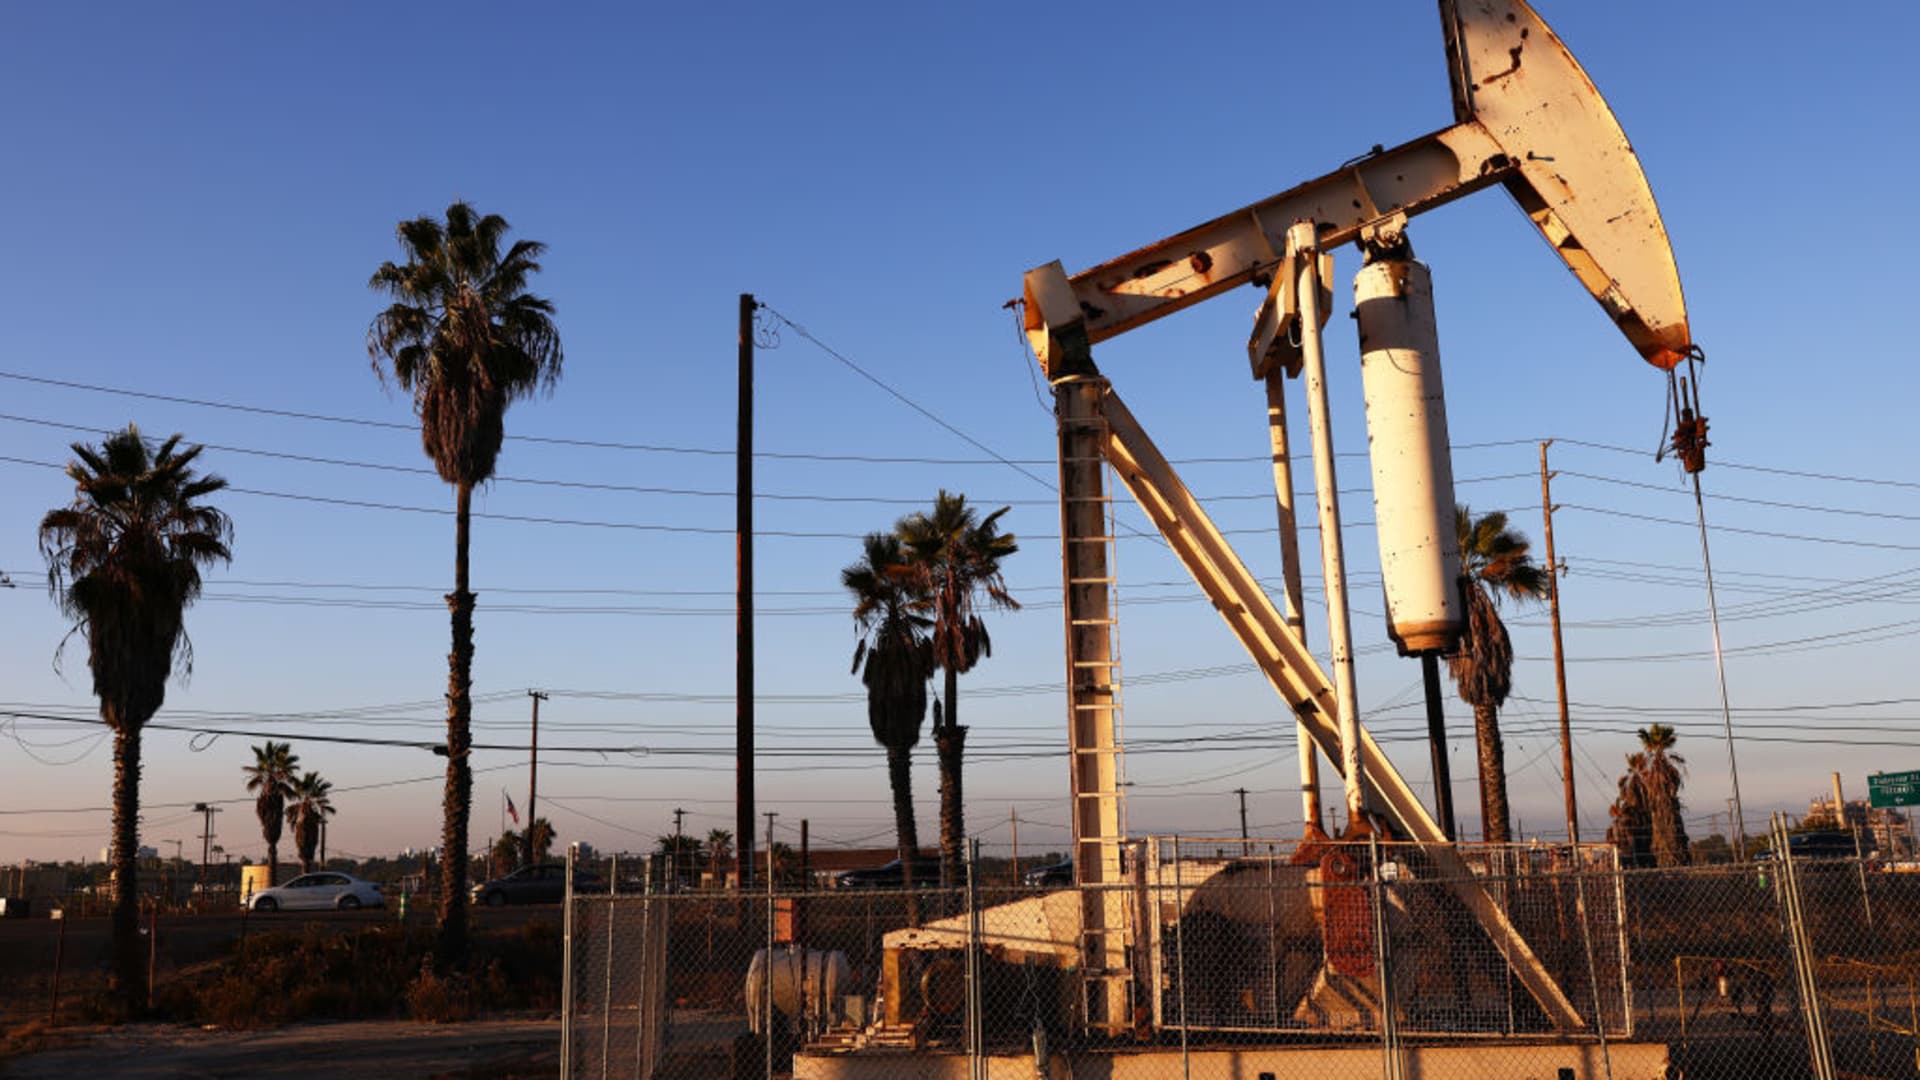 Oil and gas industry could slash methane emissions by 75% with barely a hit to income, says IEA